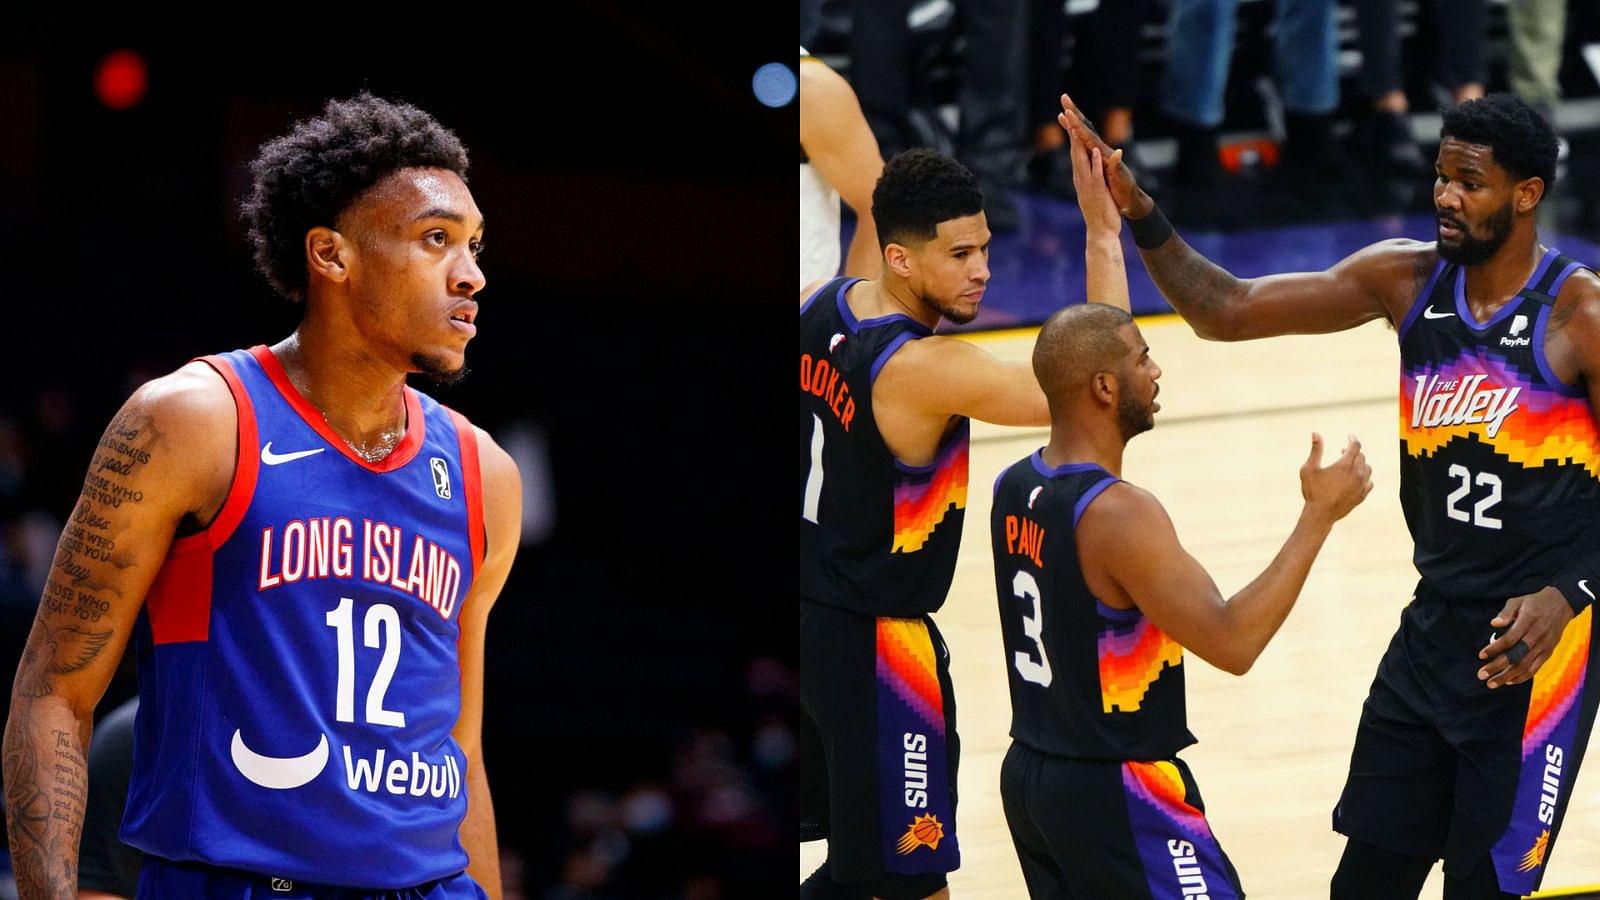 "The Phoenix Suns made Craig Randall Look Like Michael Jordan": Chris Paul and Co lost to NBL franchise Adelaide 36ers 134-124